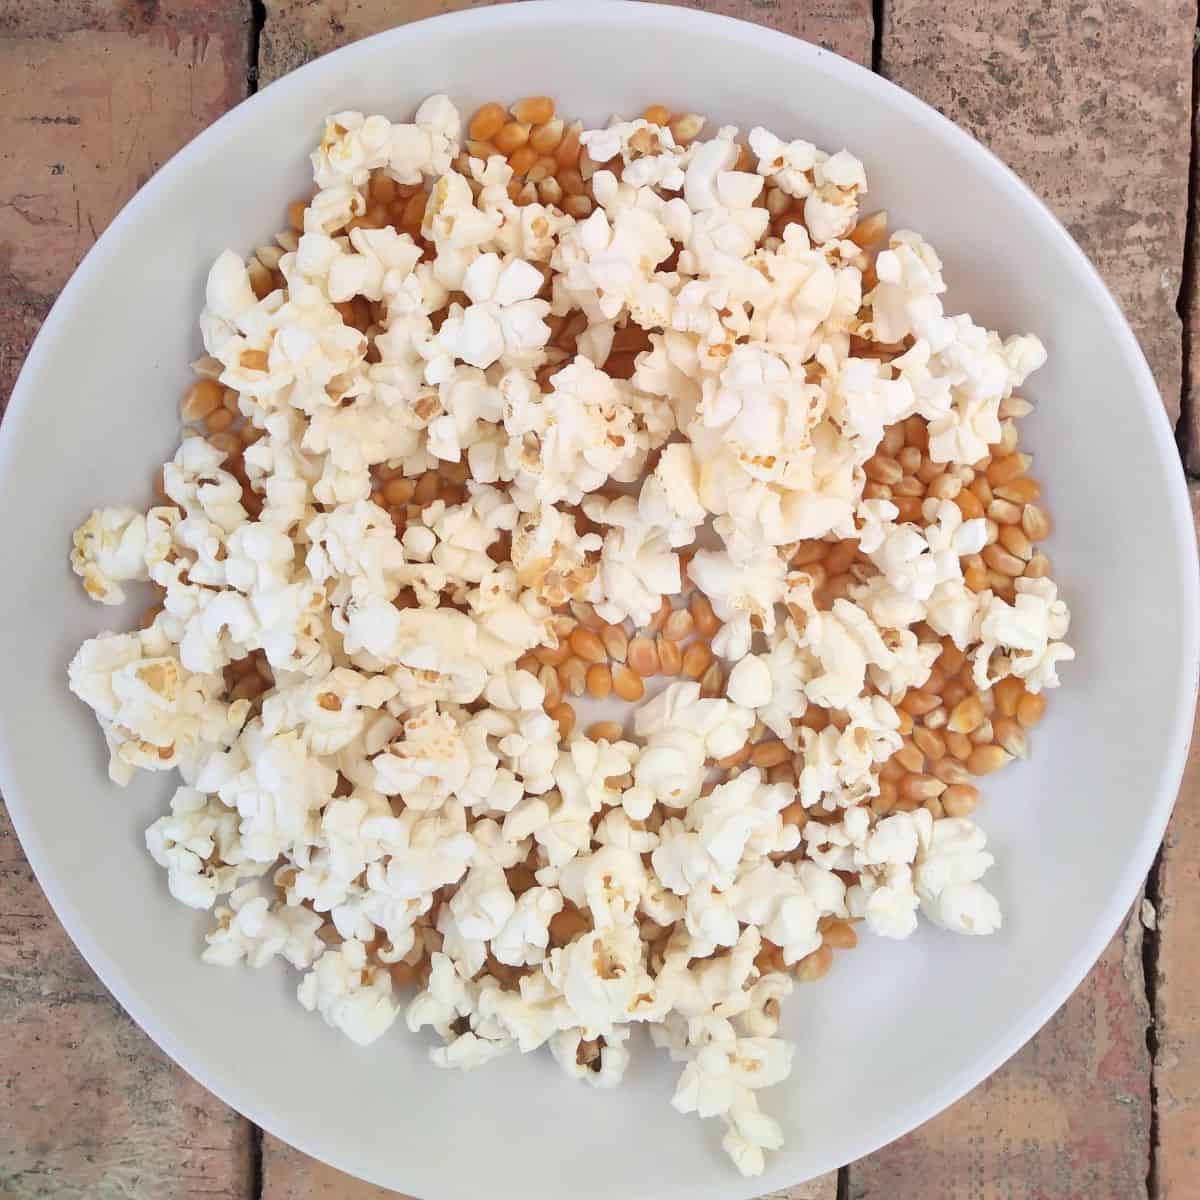 A bowl of popped popcorn and unpopped kernels sitting on a wood board.